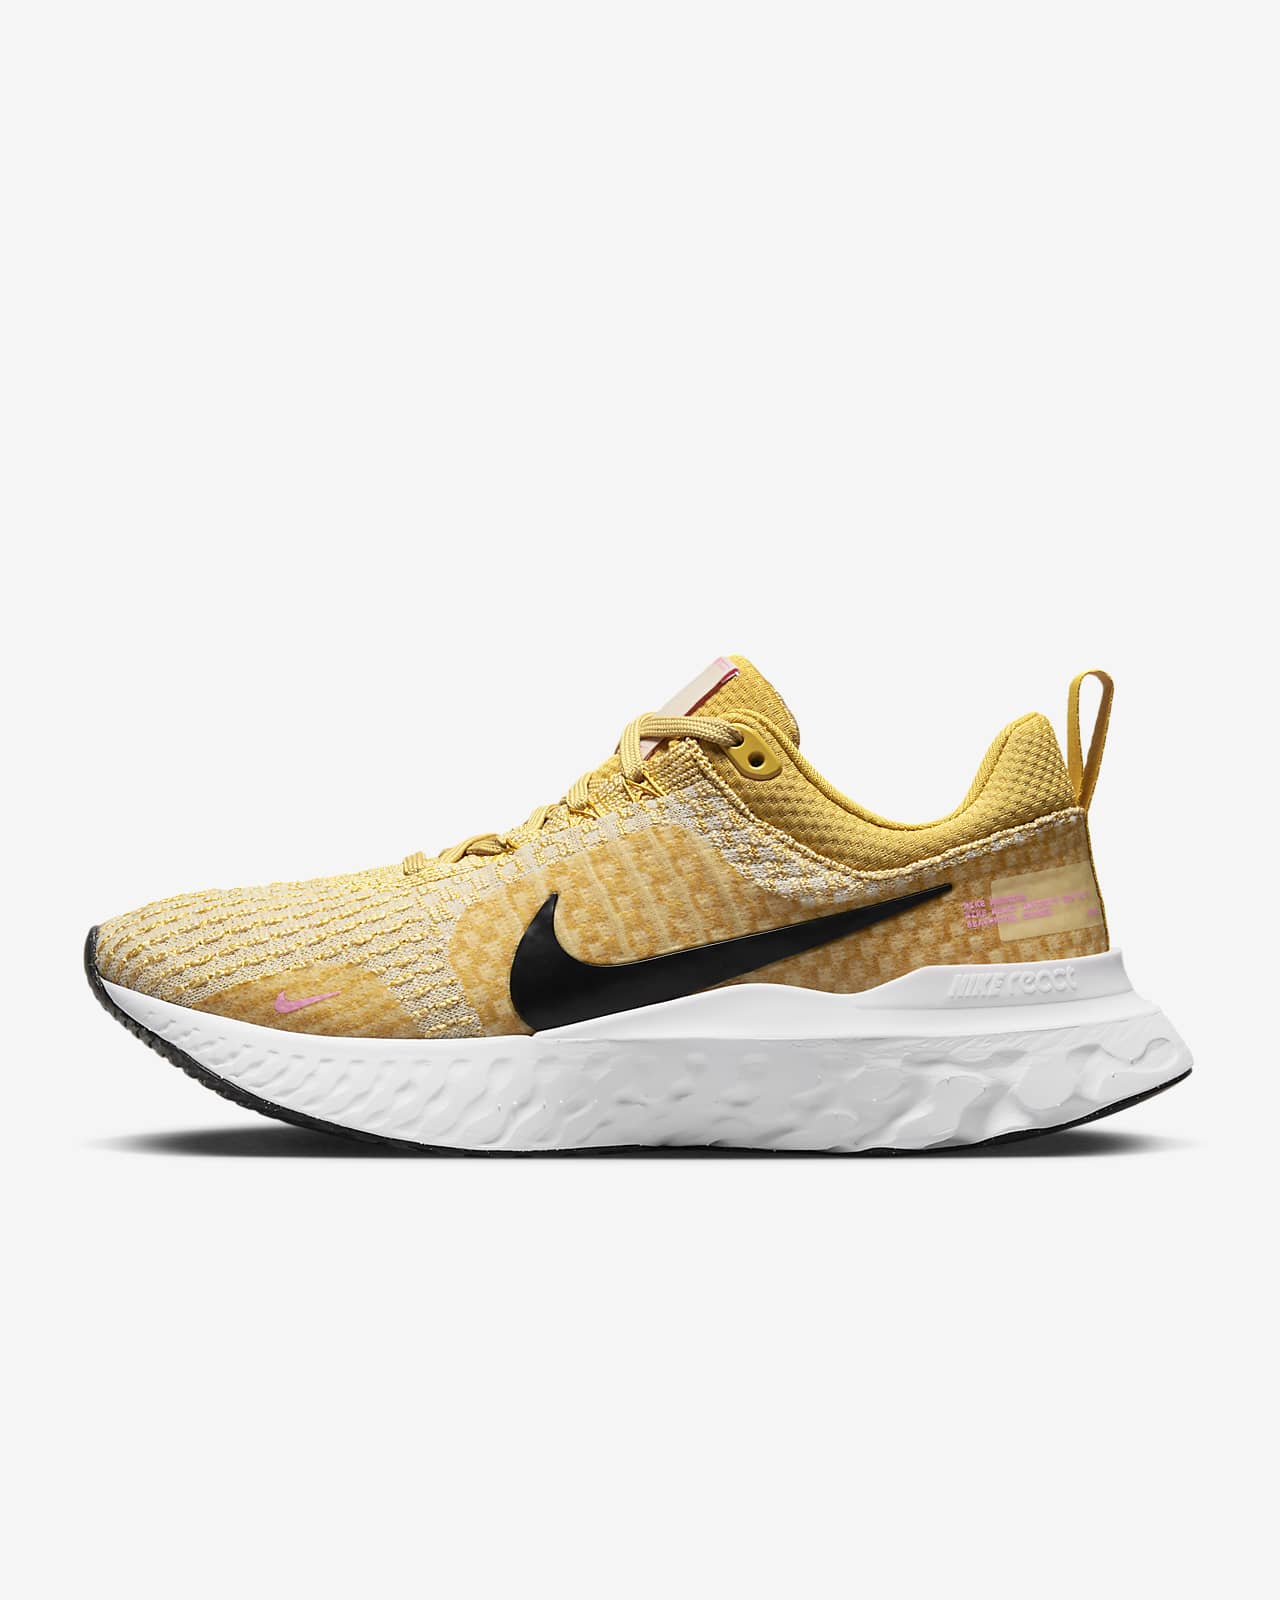 Propuesta alternativa Anillo duro juguete Chaussure de running sur route Nike React Infinity 3 pour femme. Nike BE